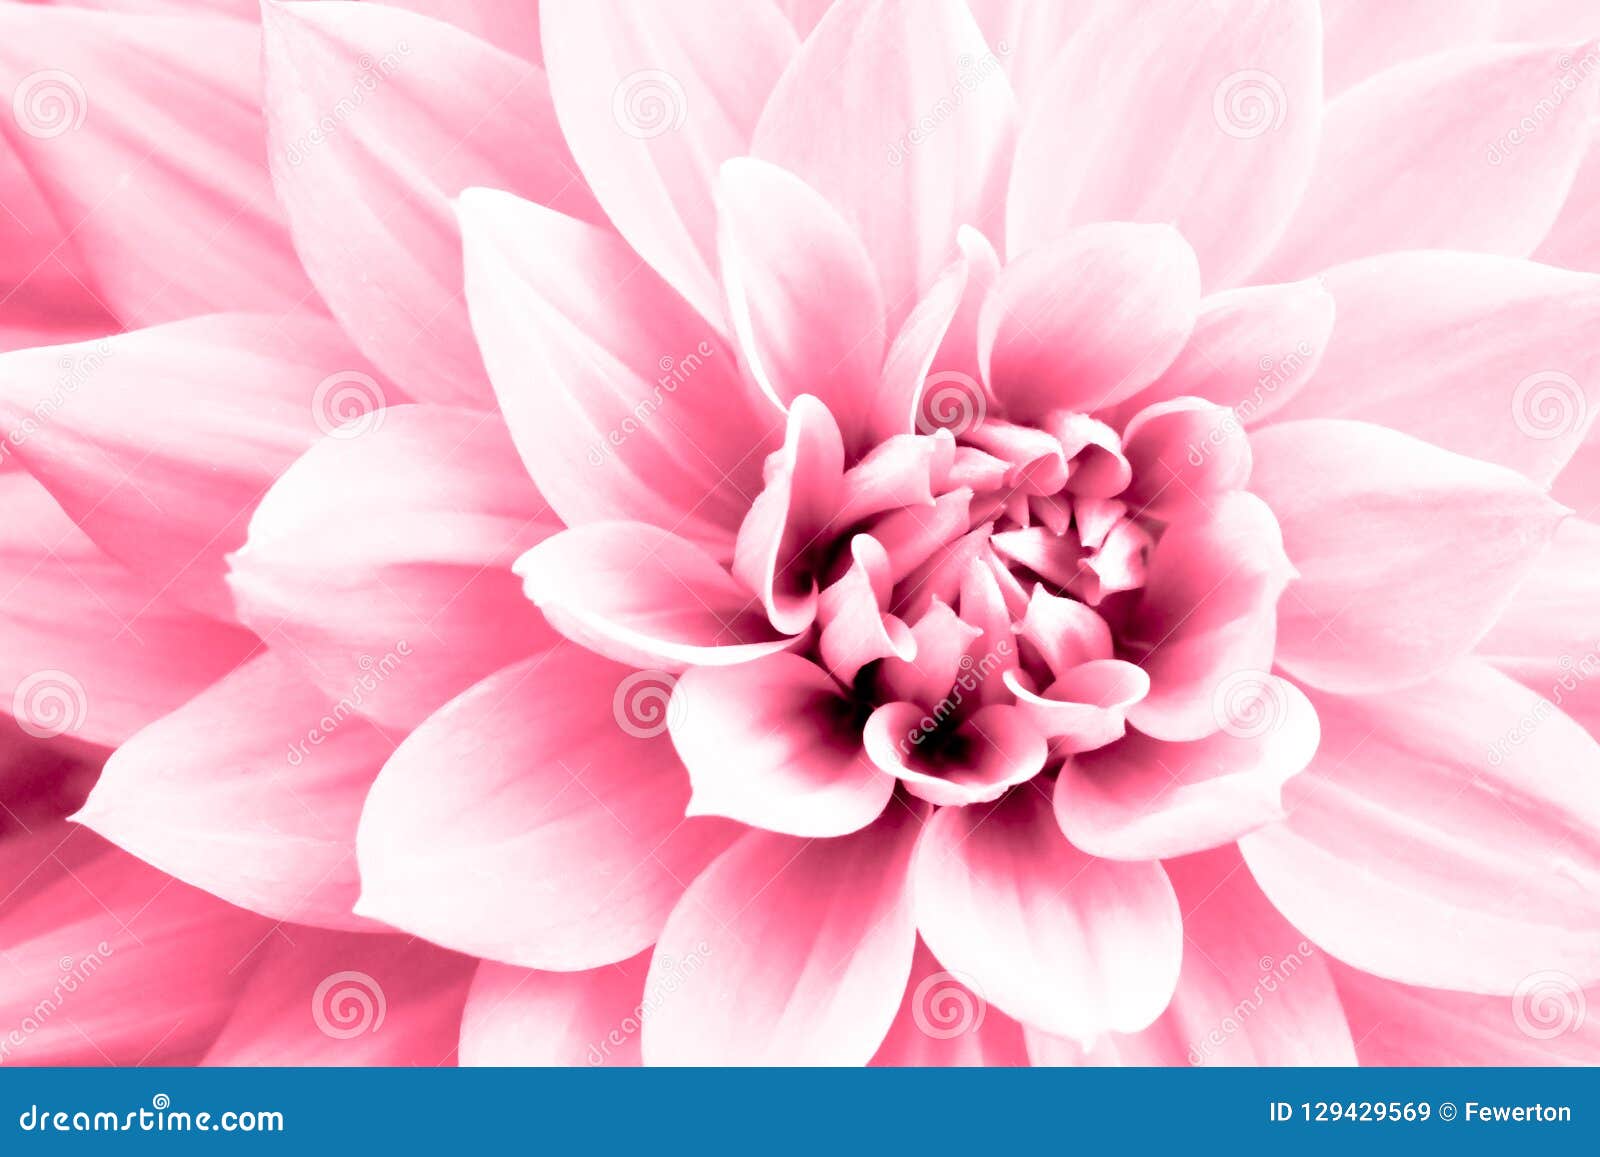 dahlia light pink flower macro photo. high key picture in color emphasizing the bright pink and highlights